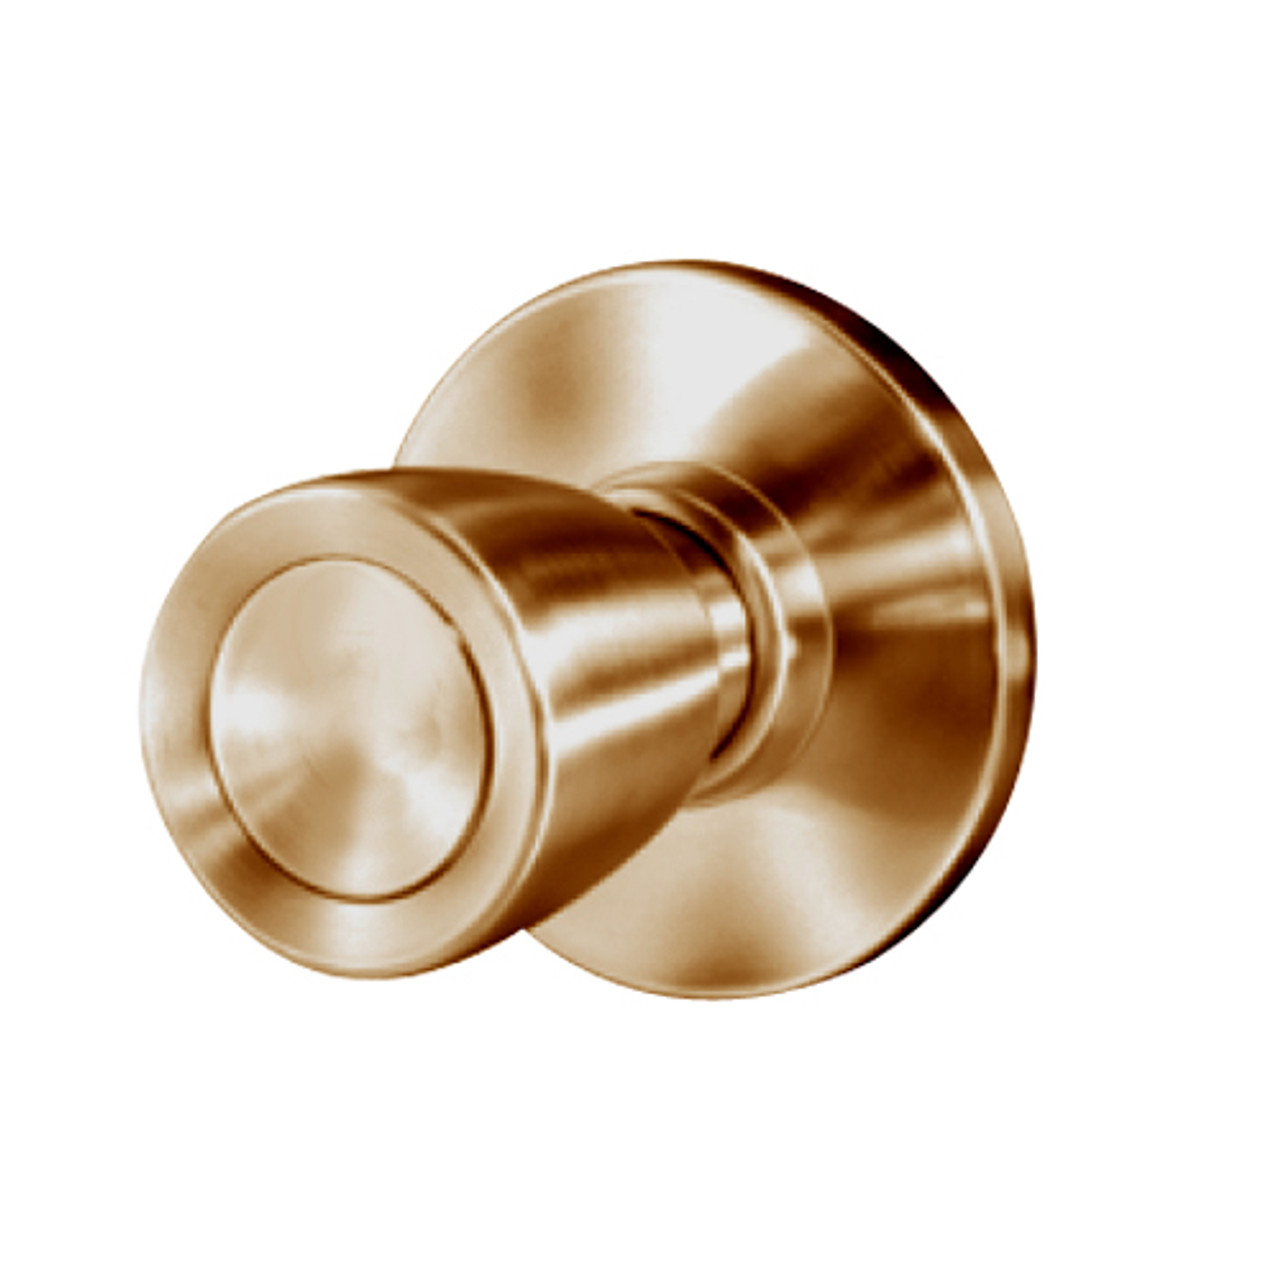 8K30Y6AS3612 Best 8K Series Exit Heavy Duty Cylindrical Knob Locks with Tulip Style in Satin Bronze